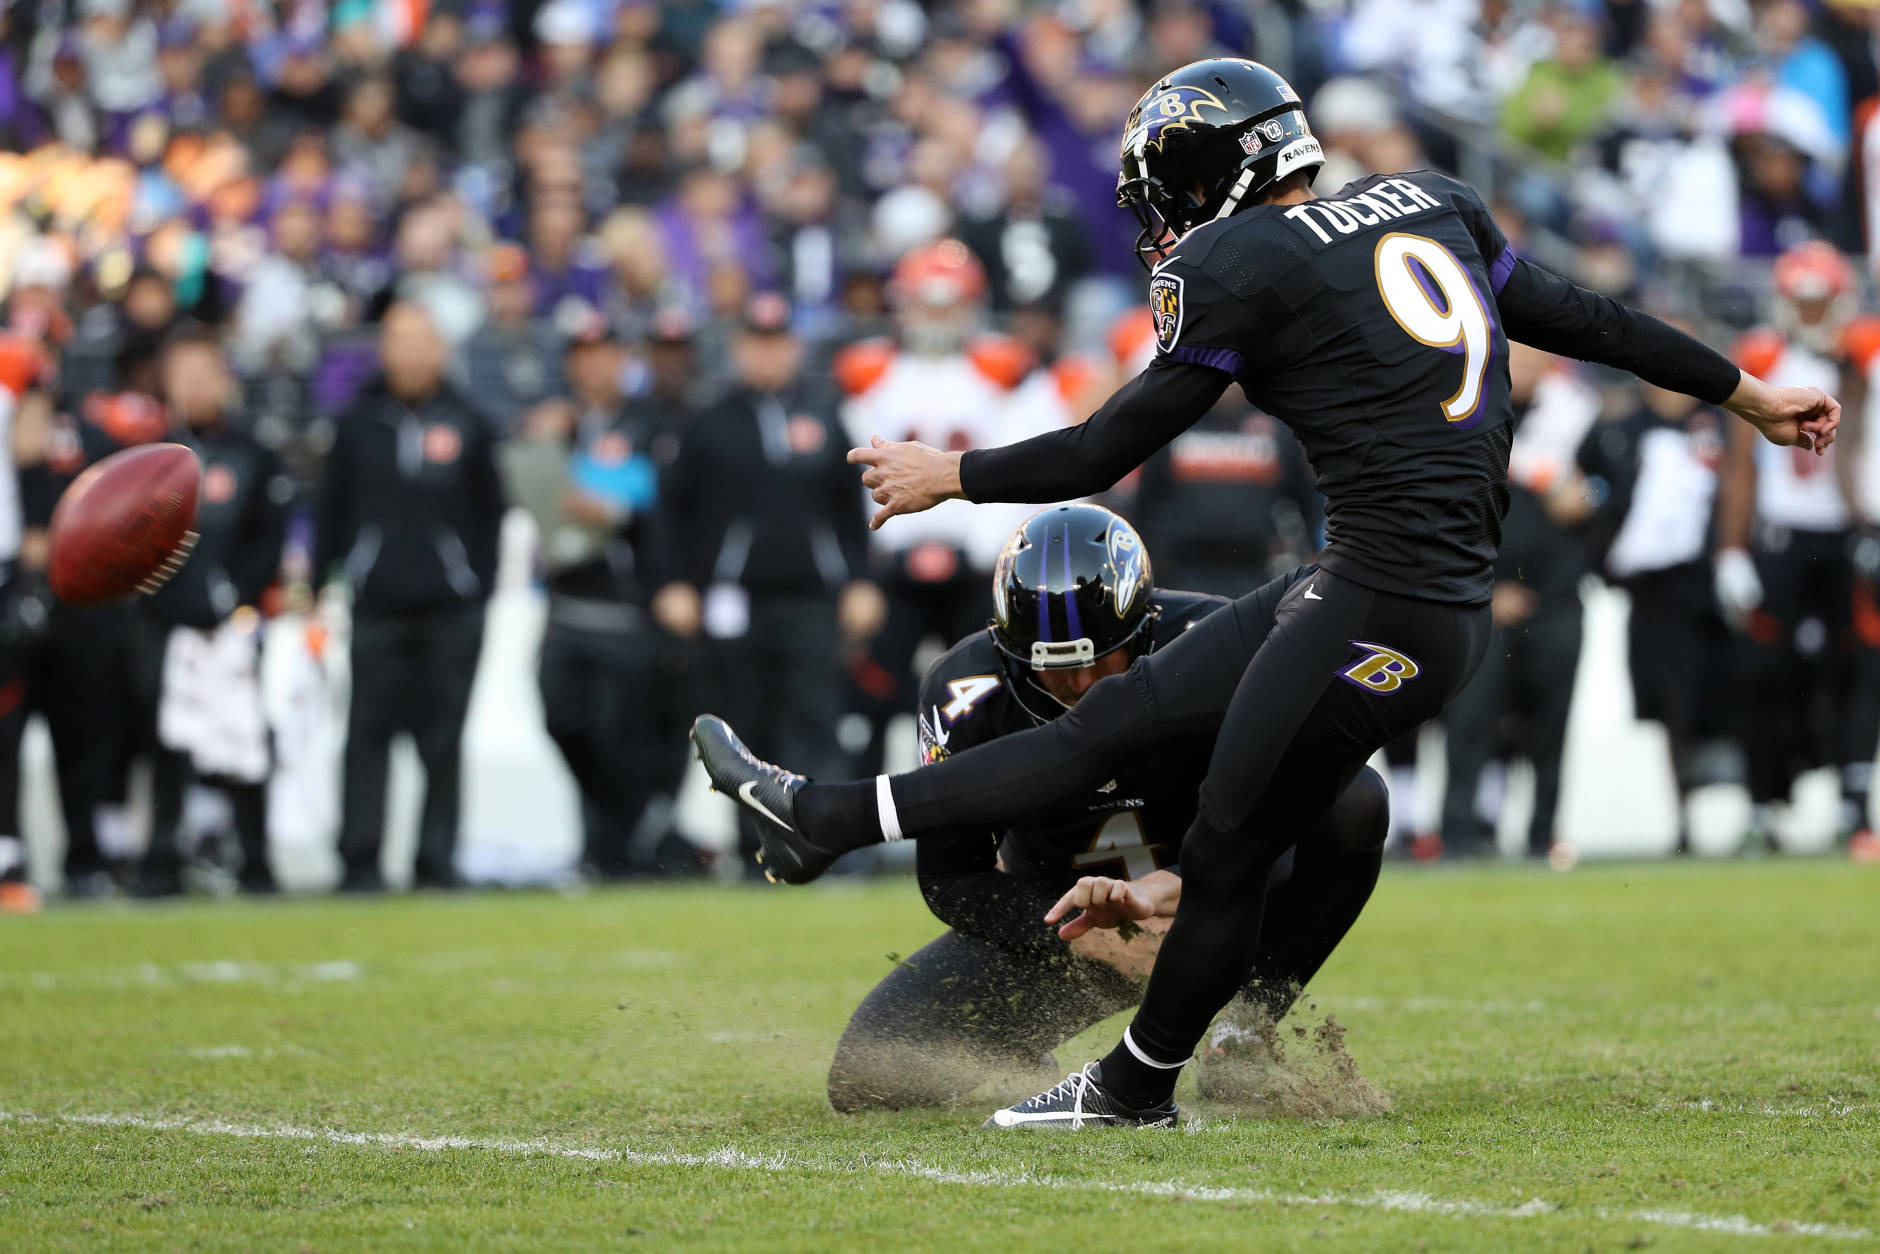 BALTIMORE, MD - NOVEMBER 27: Kicker Justin Tucker #9 of the Baltimore Ravens kicks a fourth quarter field goal against the Cincinnati Bengals at M&amp;T Bank Stadium on November 27, 2016 in Baltimore, Maryland. (Photo by Patrick Smith/Getty Images)